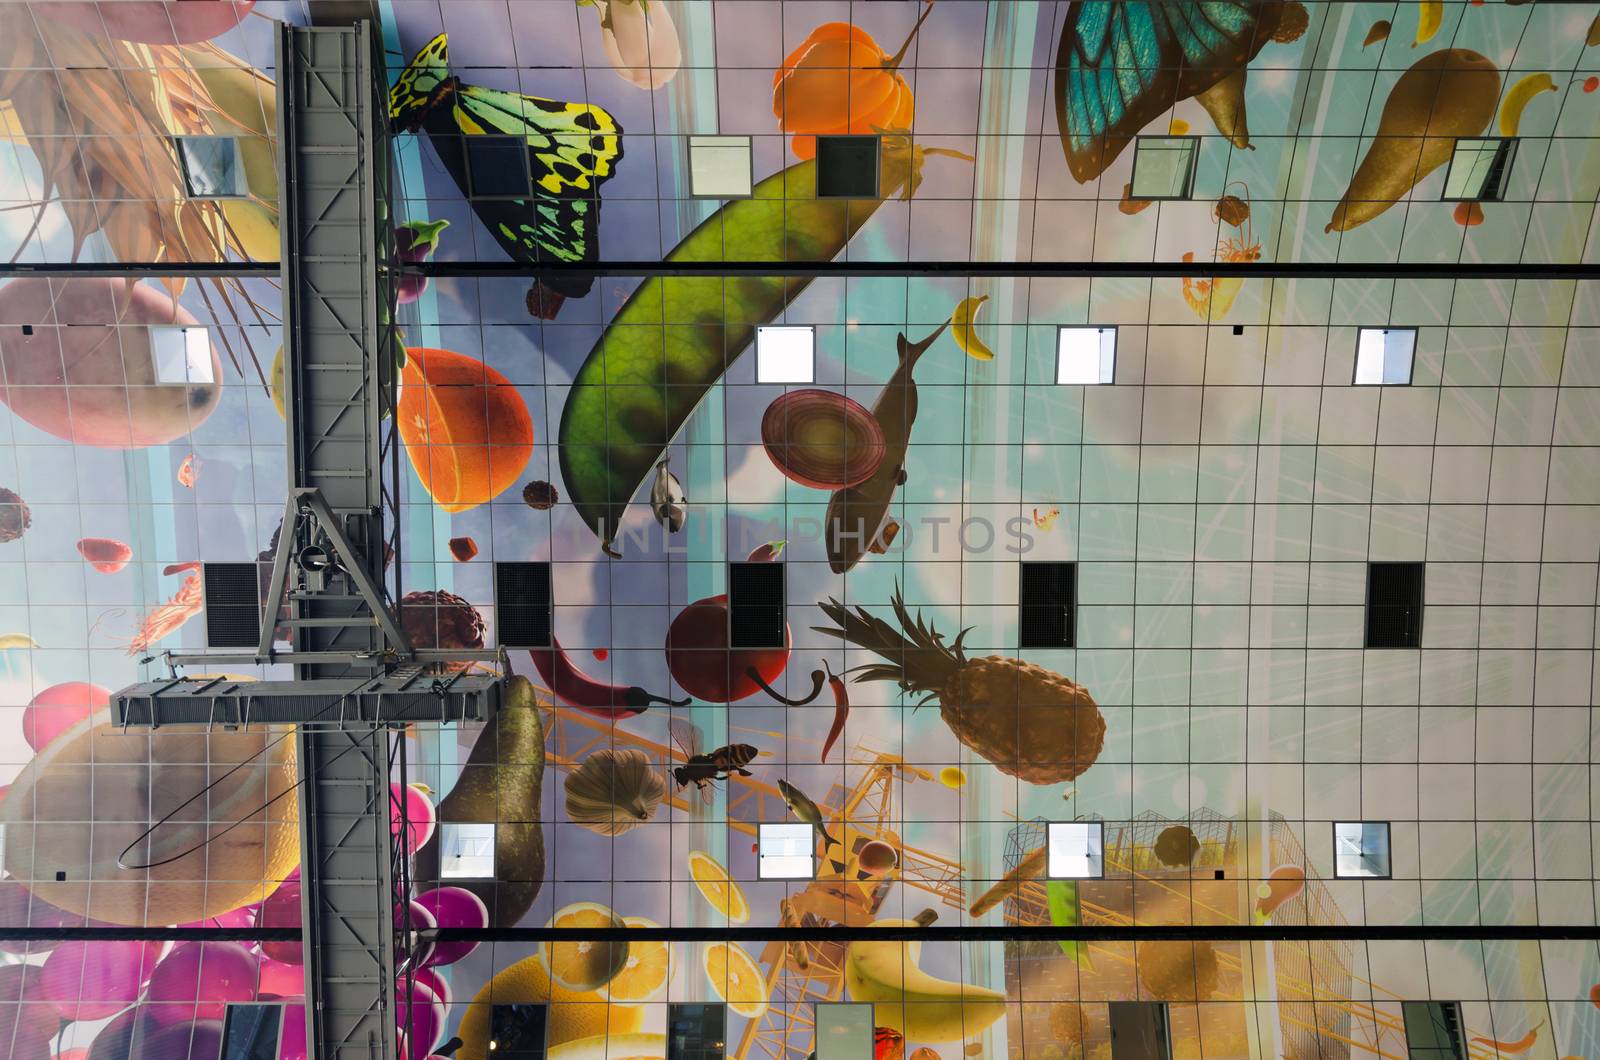 Ceiling of the new artistic Markthal in Rotterdam, The Netherlands.